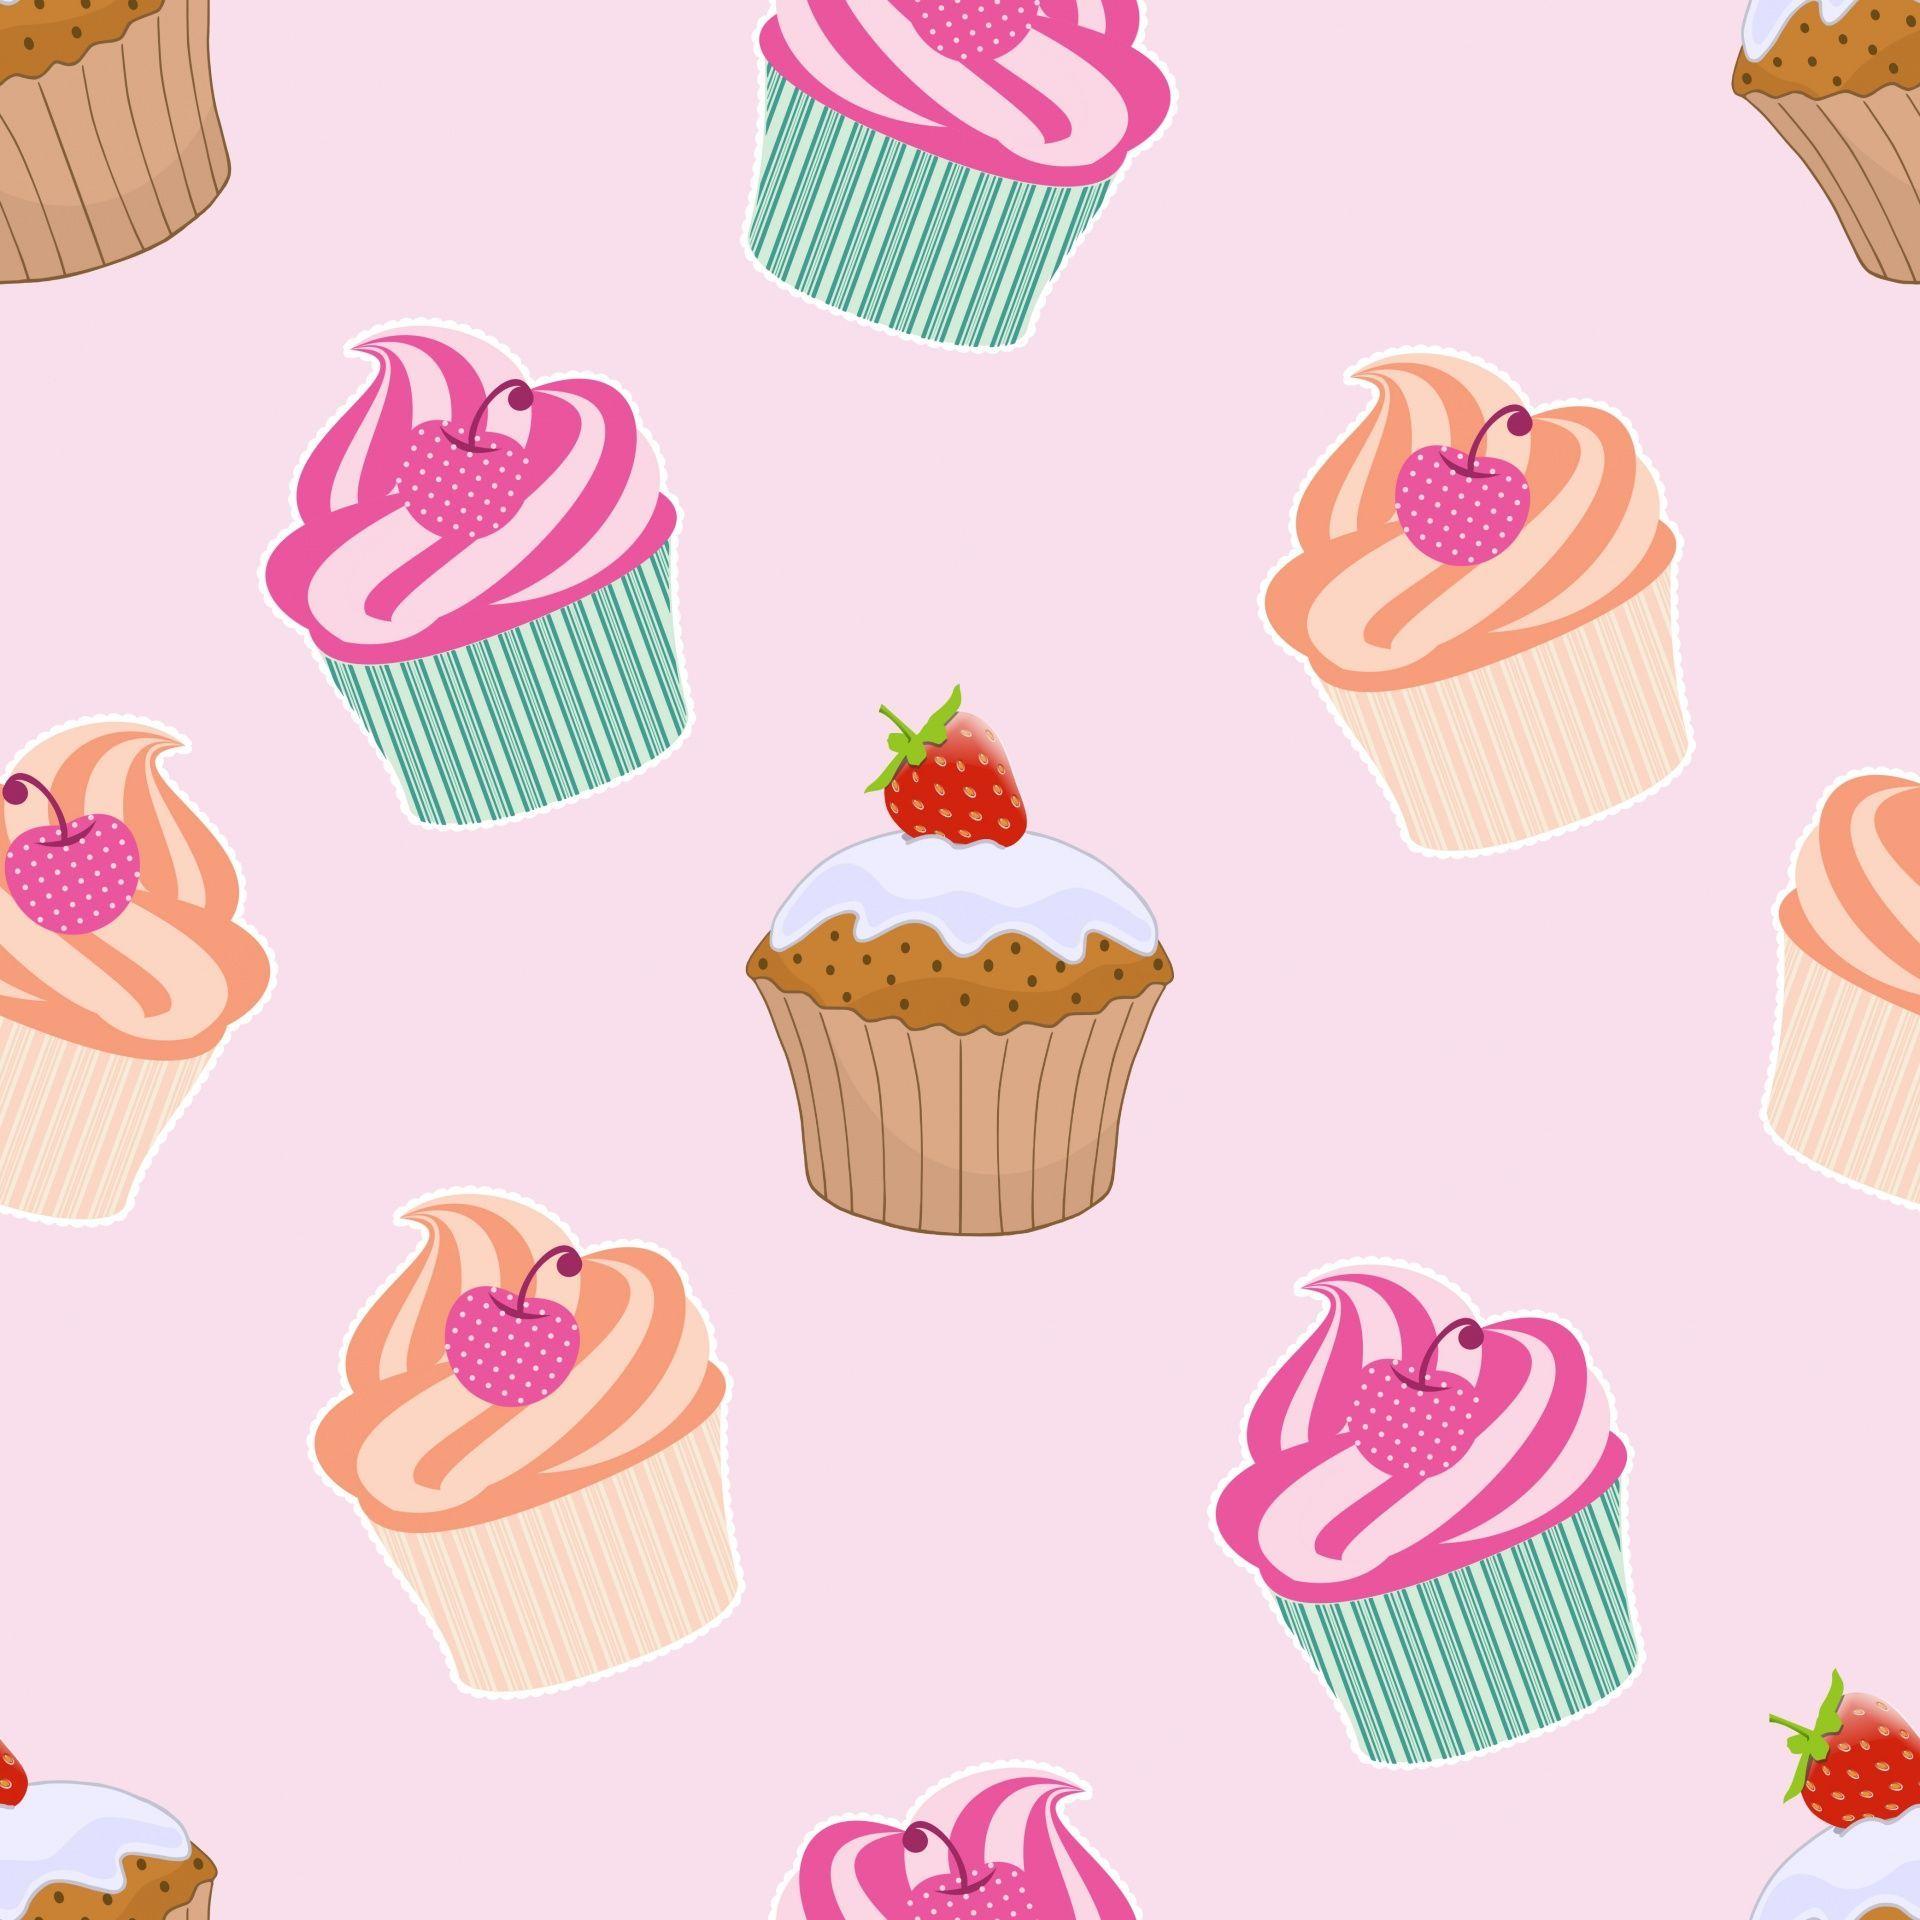 Cupcakes And Muffins Wallpaper. Cupcakes wallpaper, Painted canvas bags, HD designs